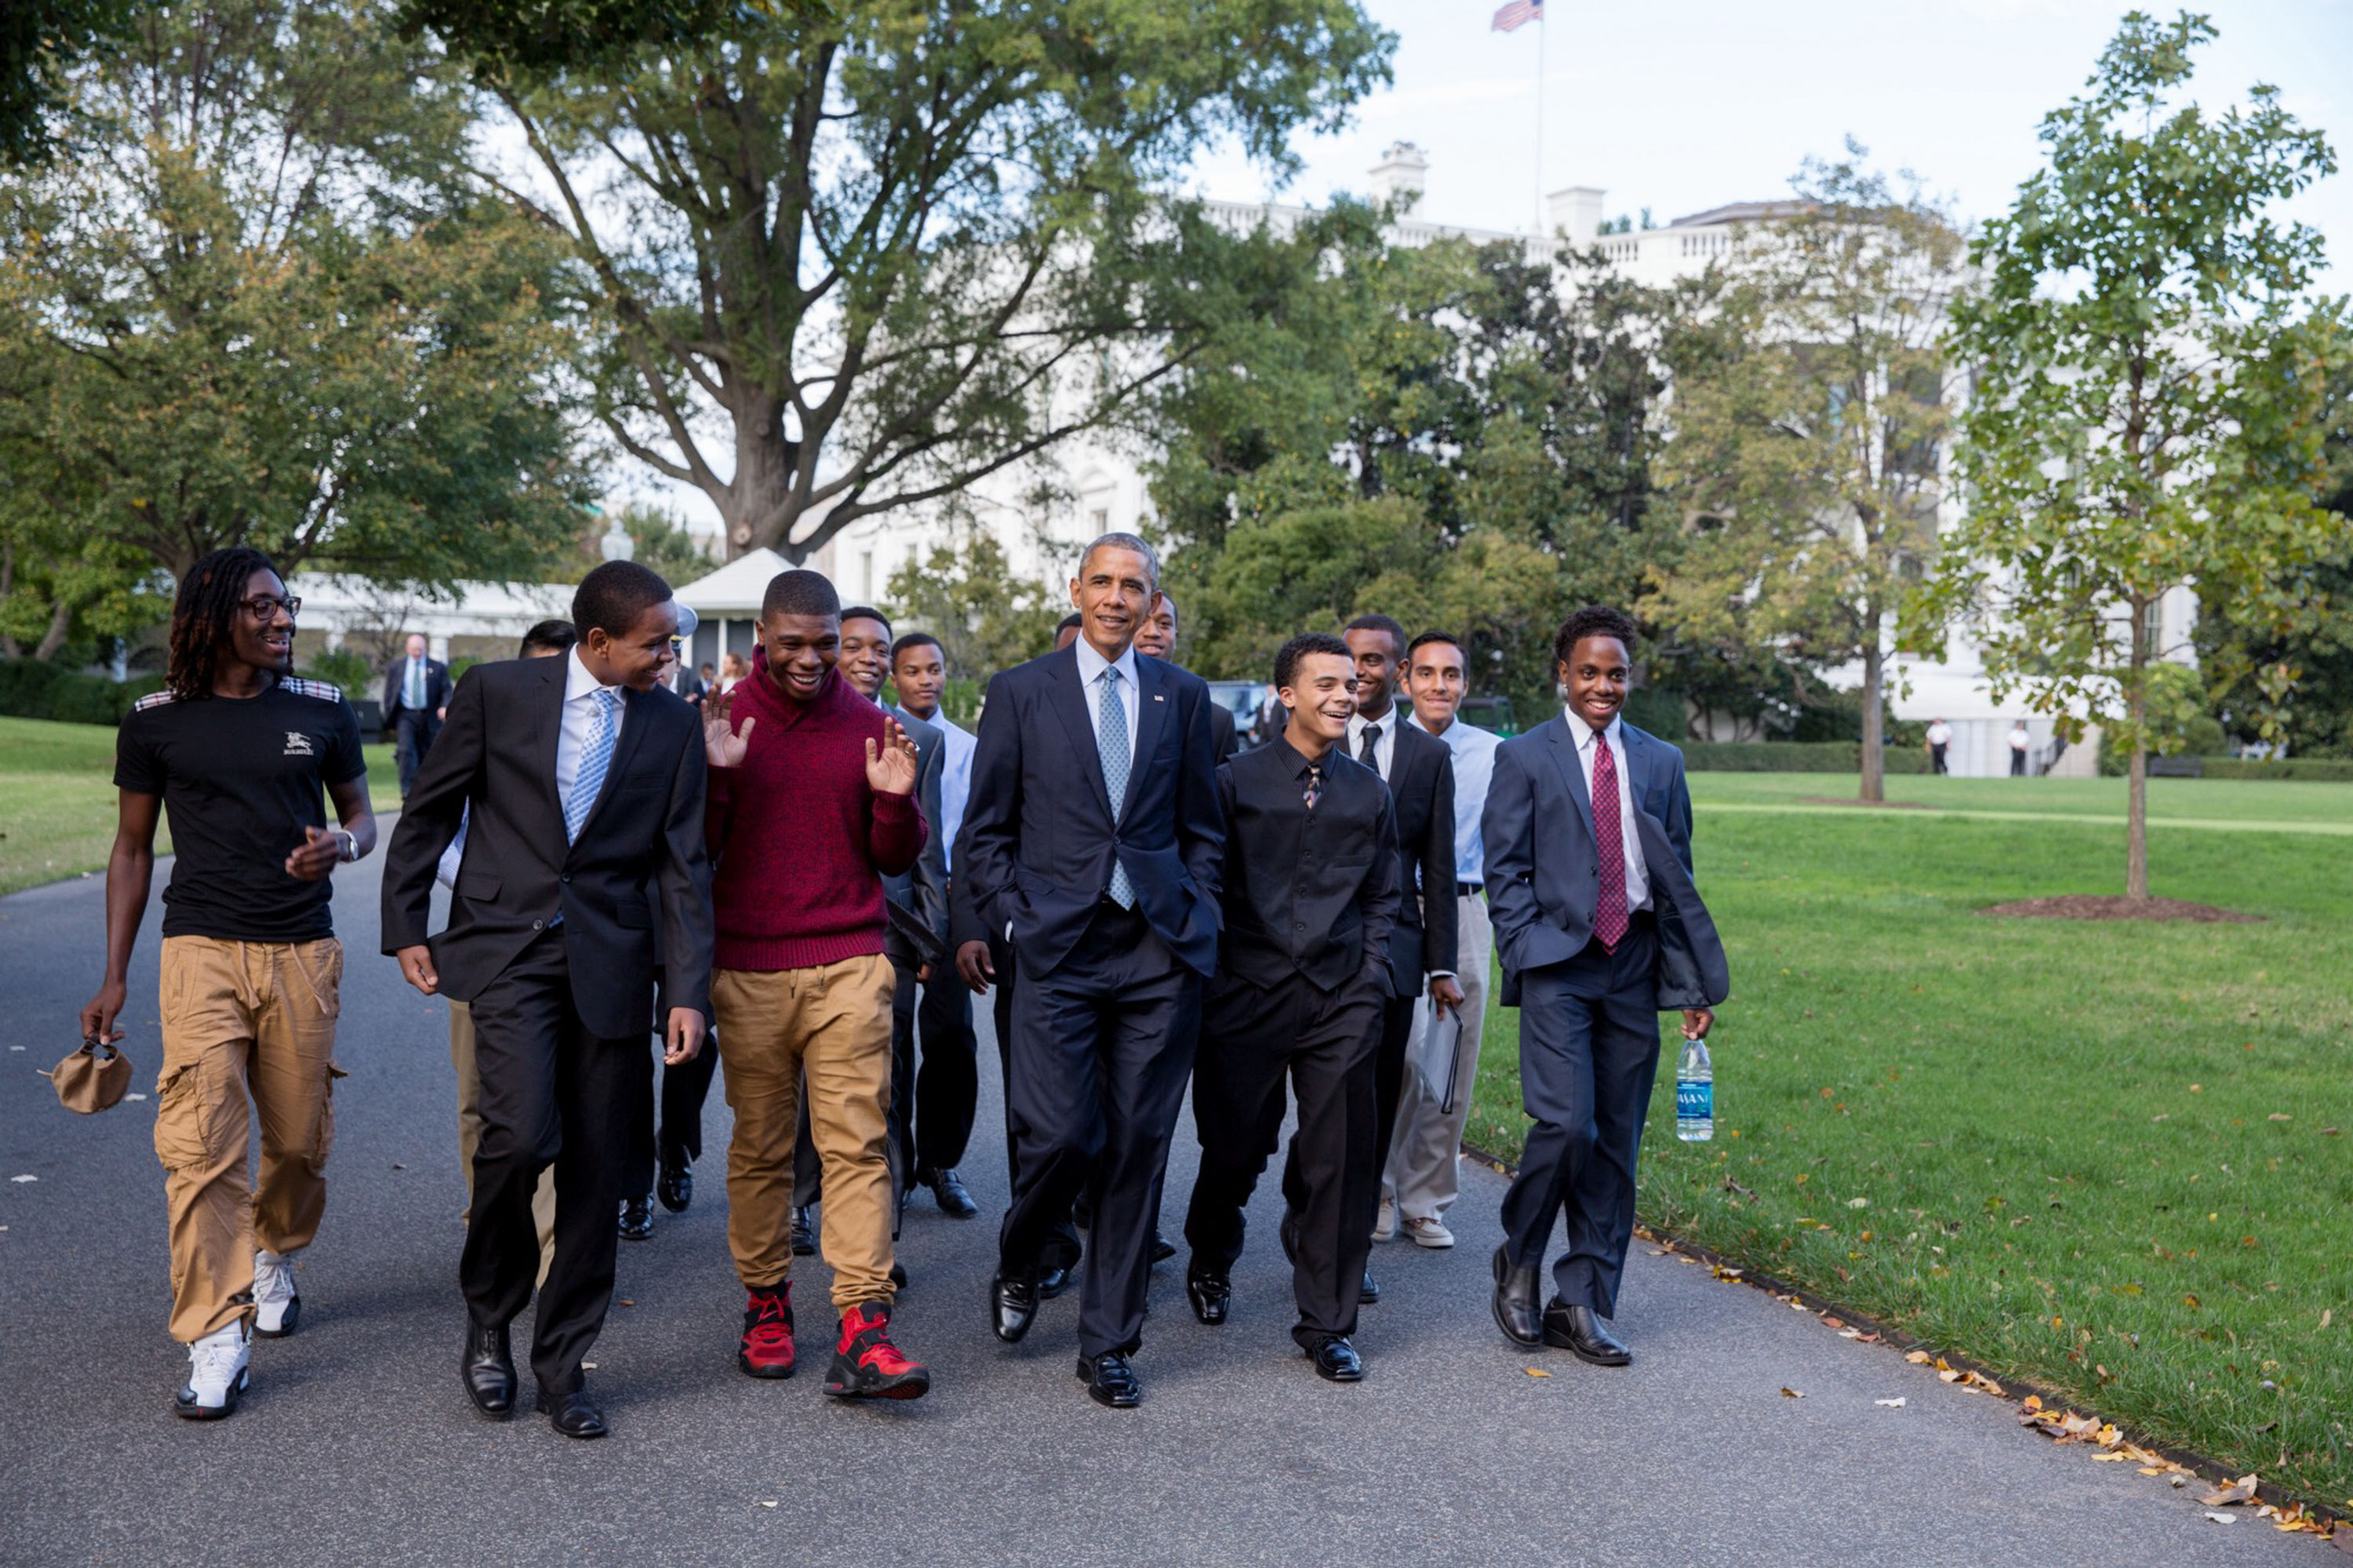 President Obama is wearing a suit and walking on a path in front of the White House alongside a group of Black young men with a range of skintones and hairstyles.